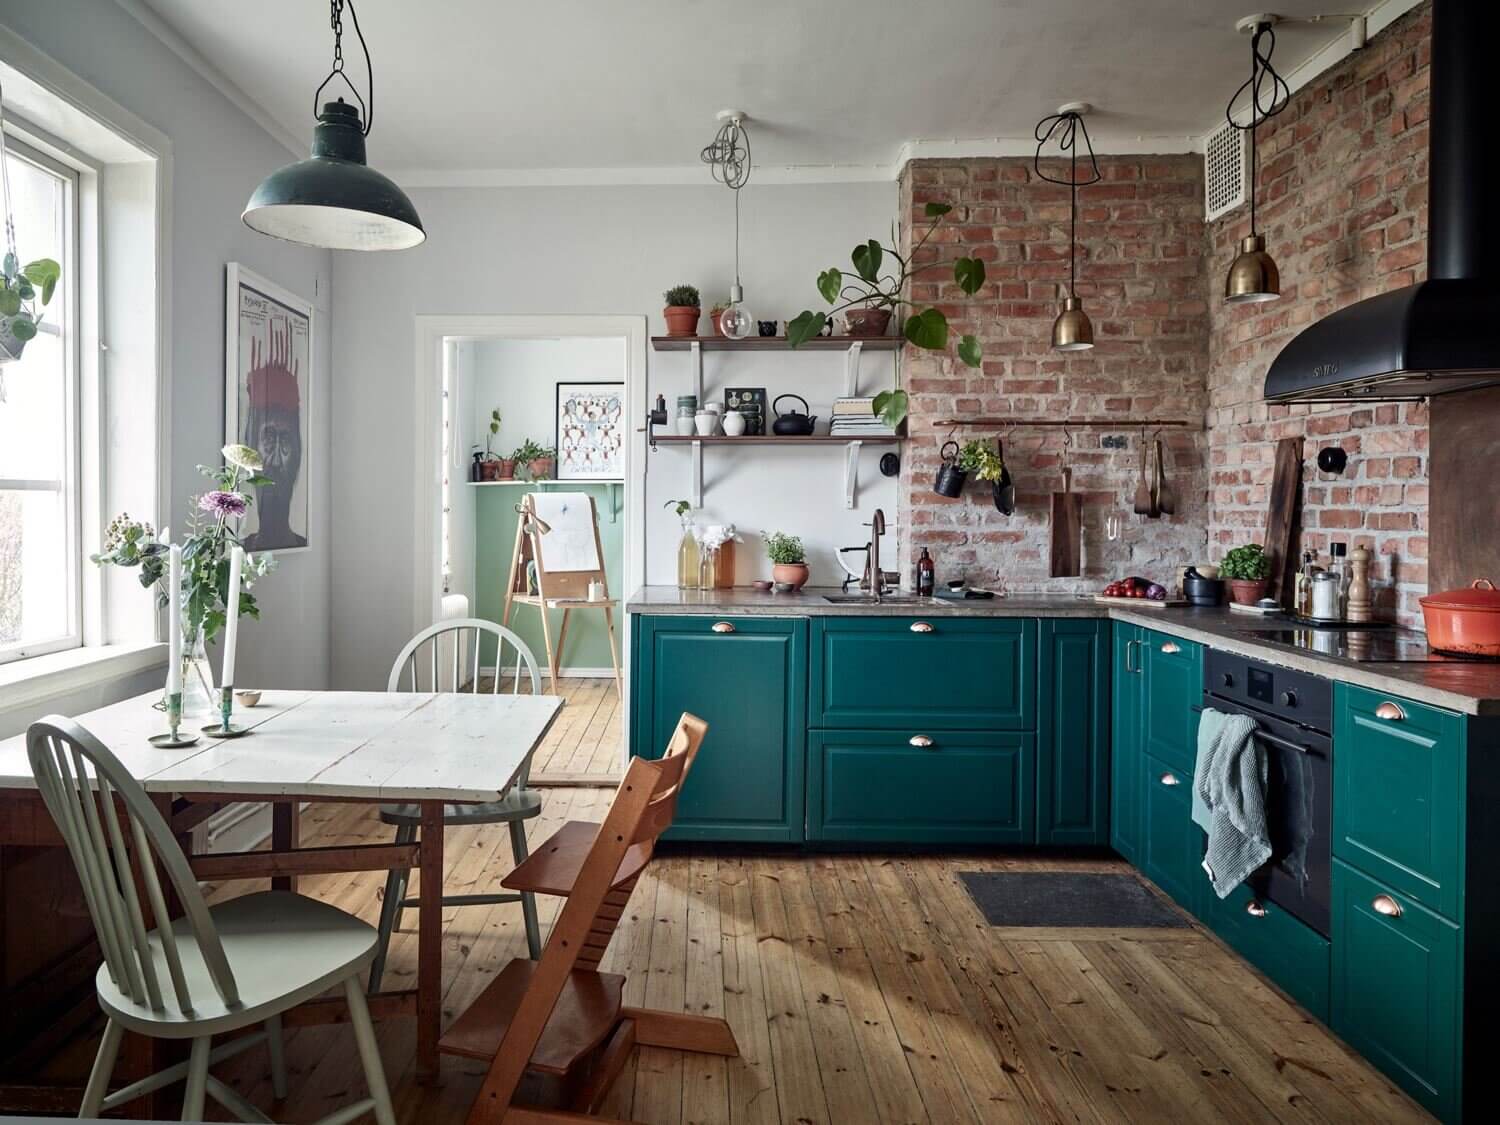 AGreenKitchenwithExposedBrickinaScandiApartment TheNordroom6 A Green Kitchen with Exposed Brick in a Scandi Apartment